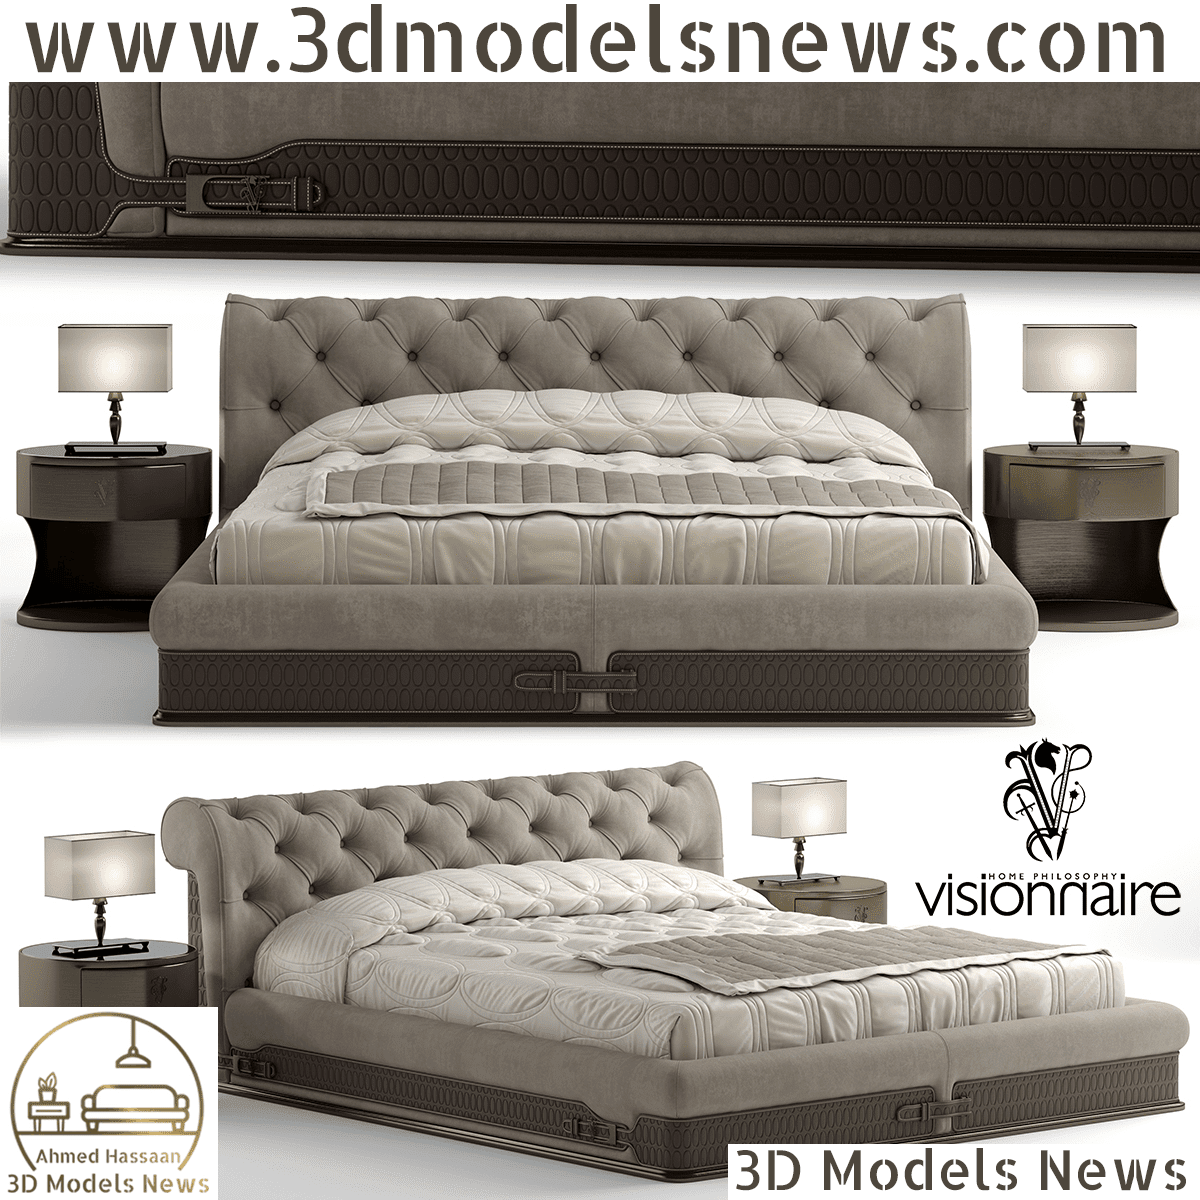 Visionnaire Chester Lawrence bed model